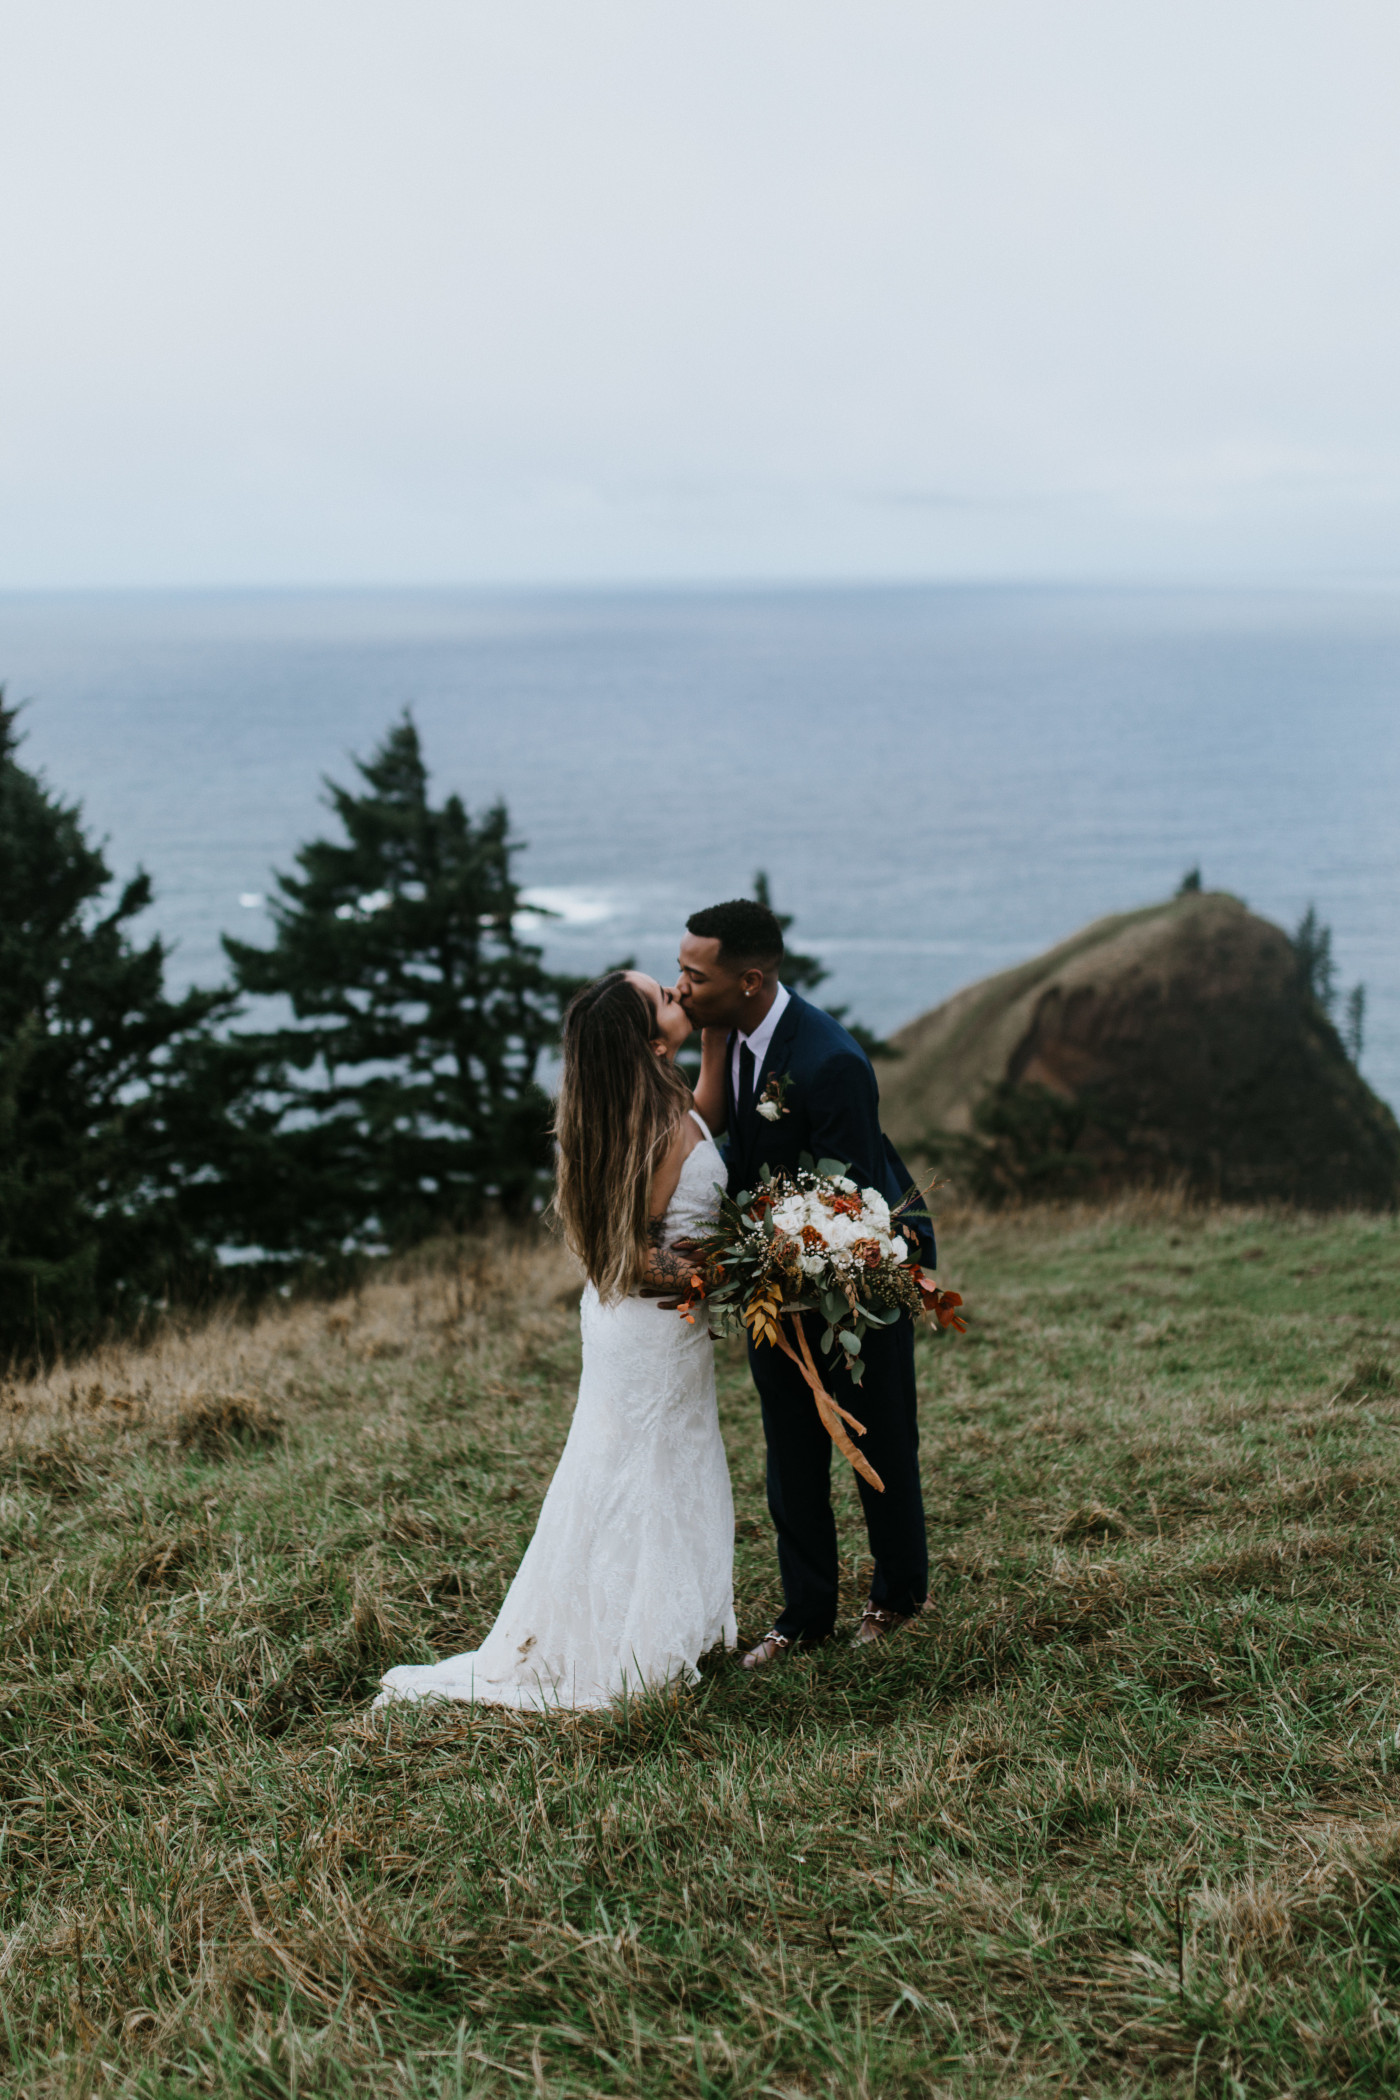 Deandre and Ariana kiss. Elopement photography at Mount Hood by Sienna Plus Josh.